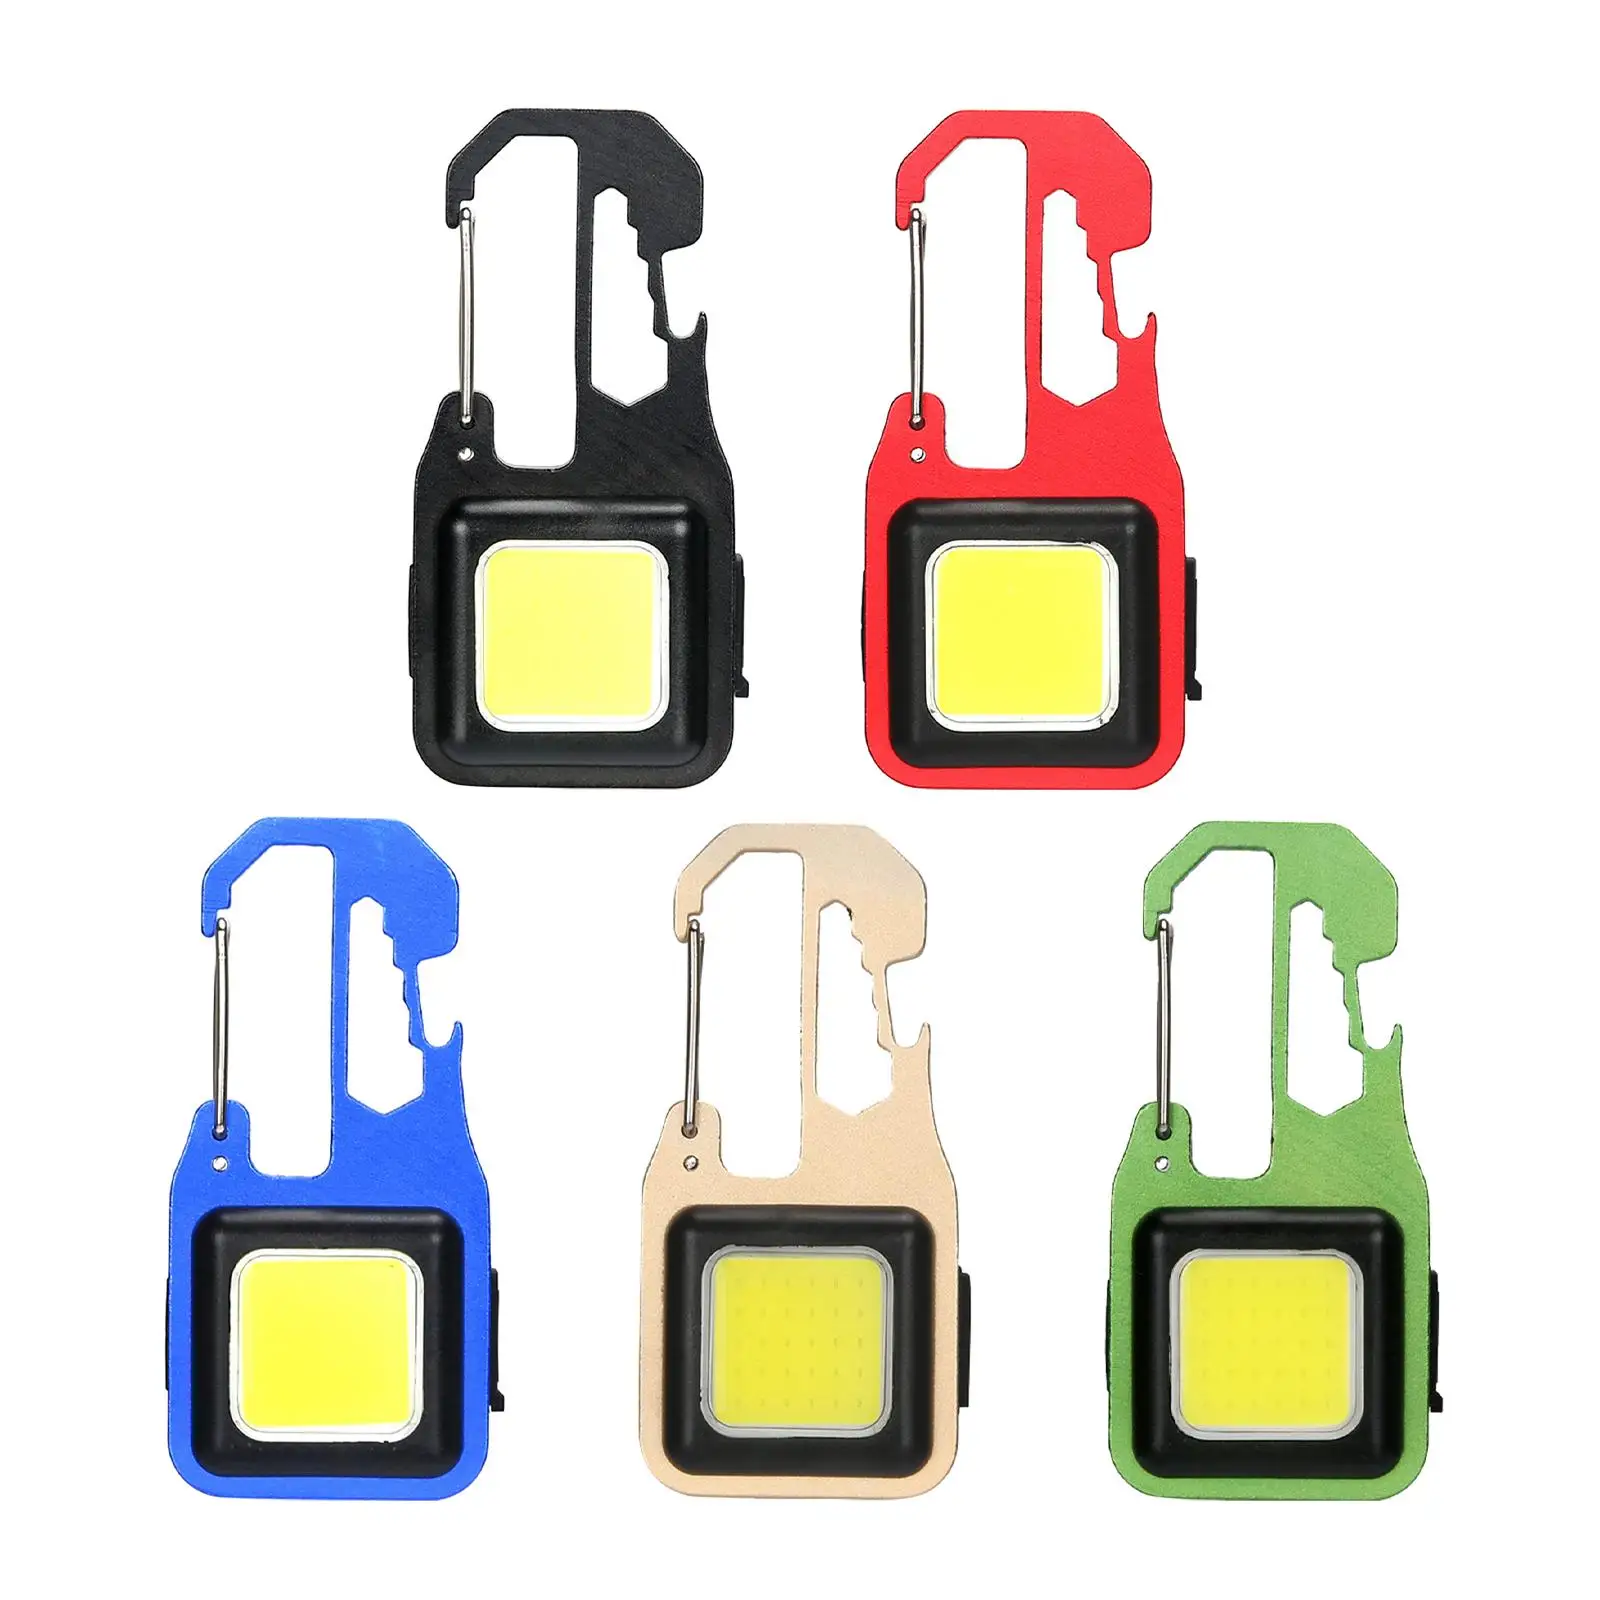 Portable COB flashlights Keychain Bottle Opener Camping Lamp Magnet Base Keyring Torch Light USB LED Rechargeable Bright